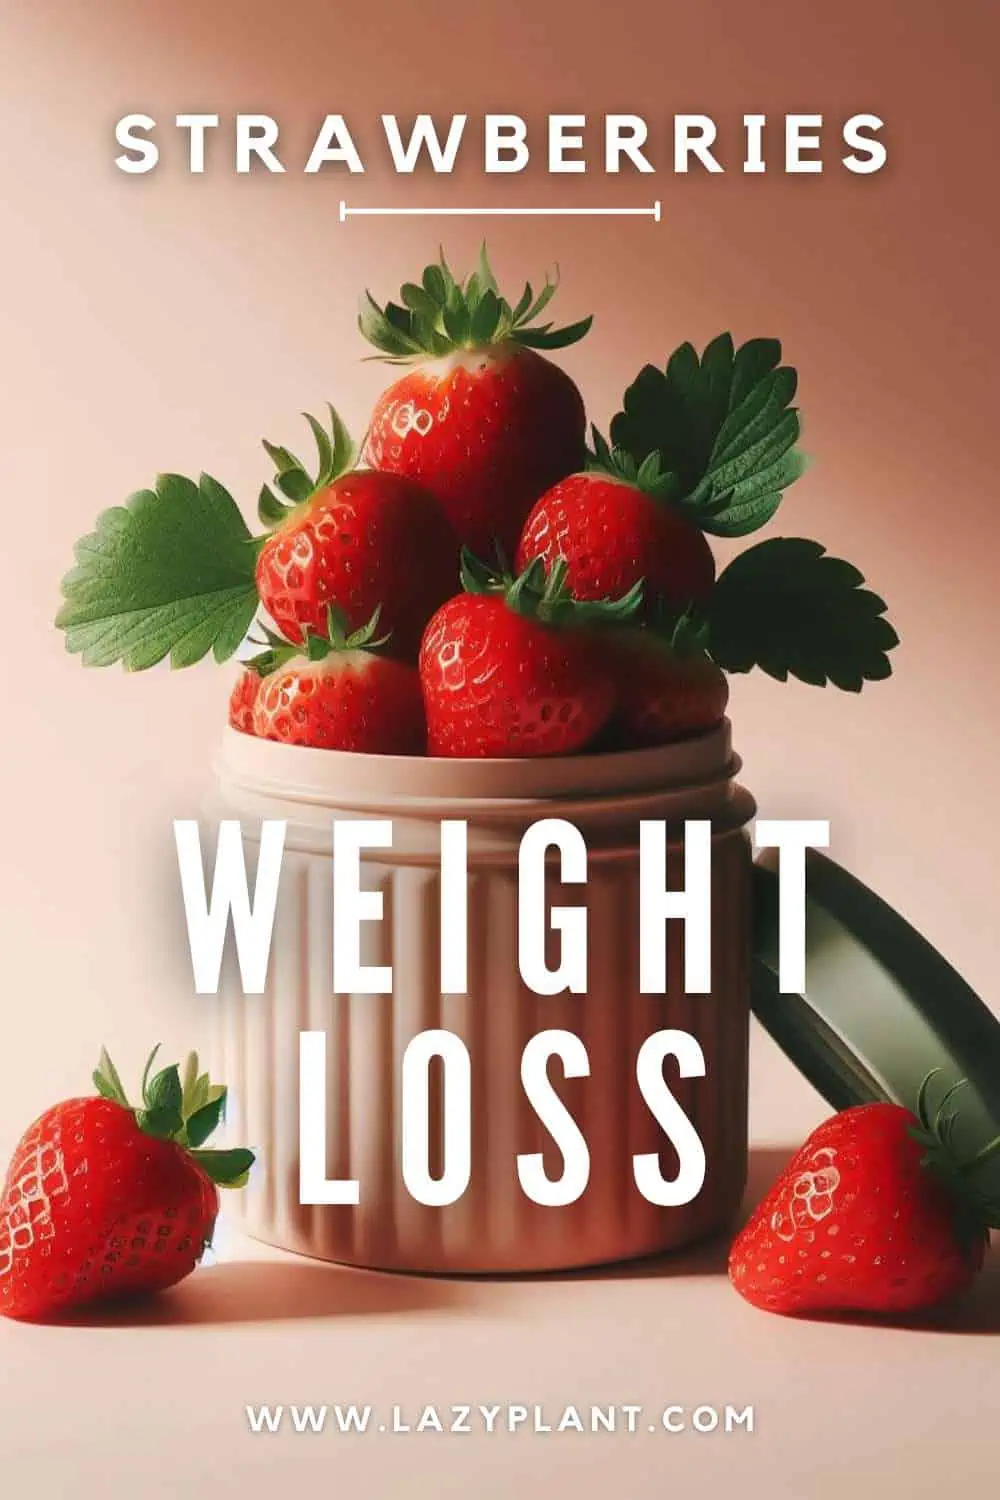 Benefits of Strawberries for Weight Loss